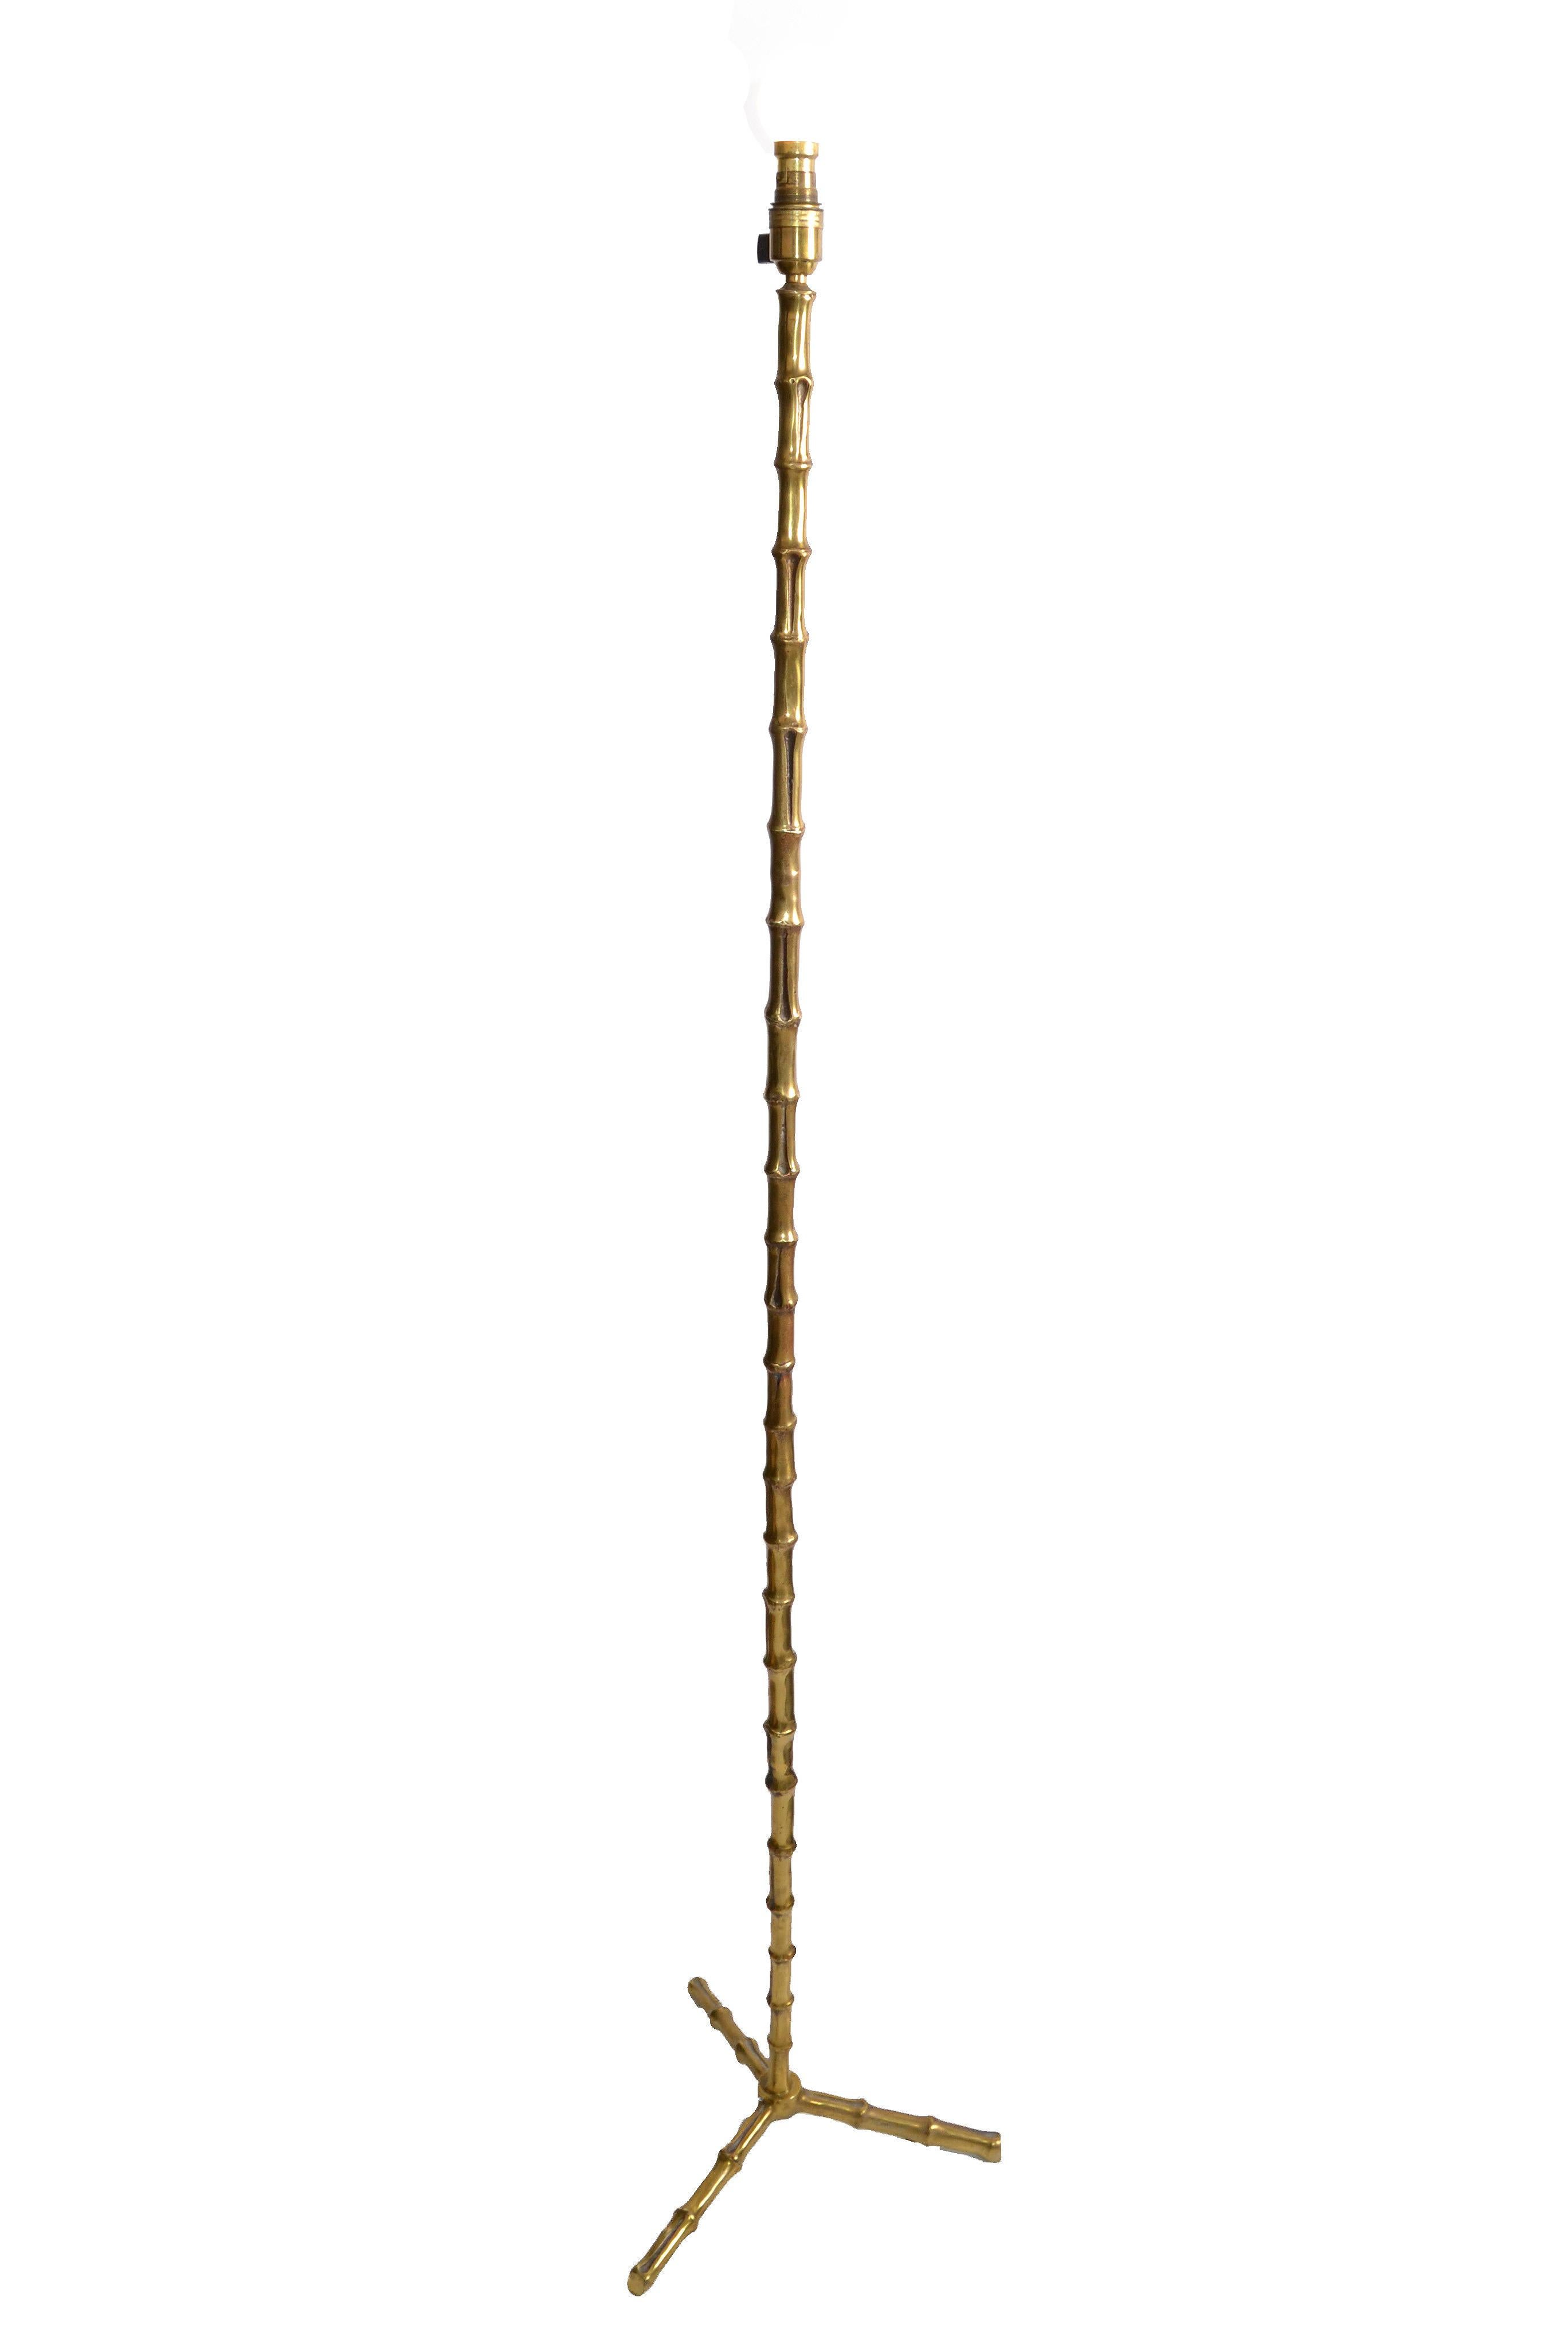 Mid-20th Century Pair of Maison Baguès Bronze Faux Bamboo Floor Lamp French Mid-Century Modern For Sale